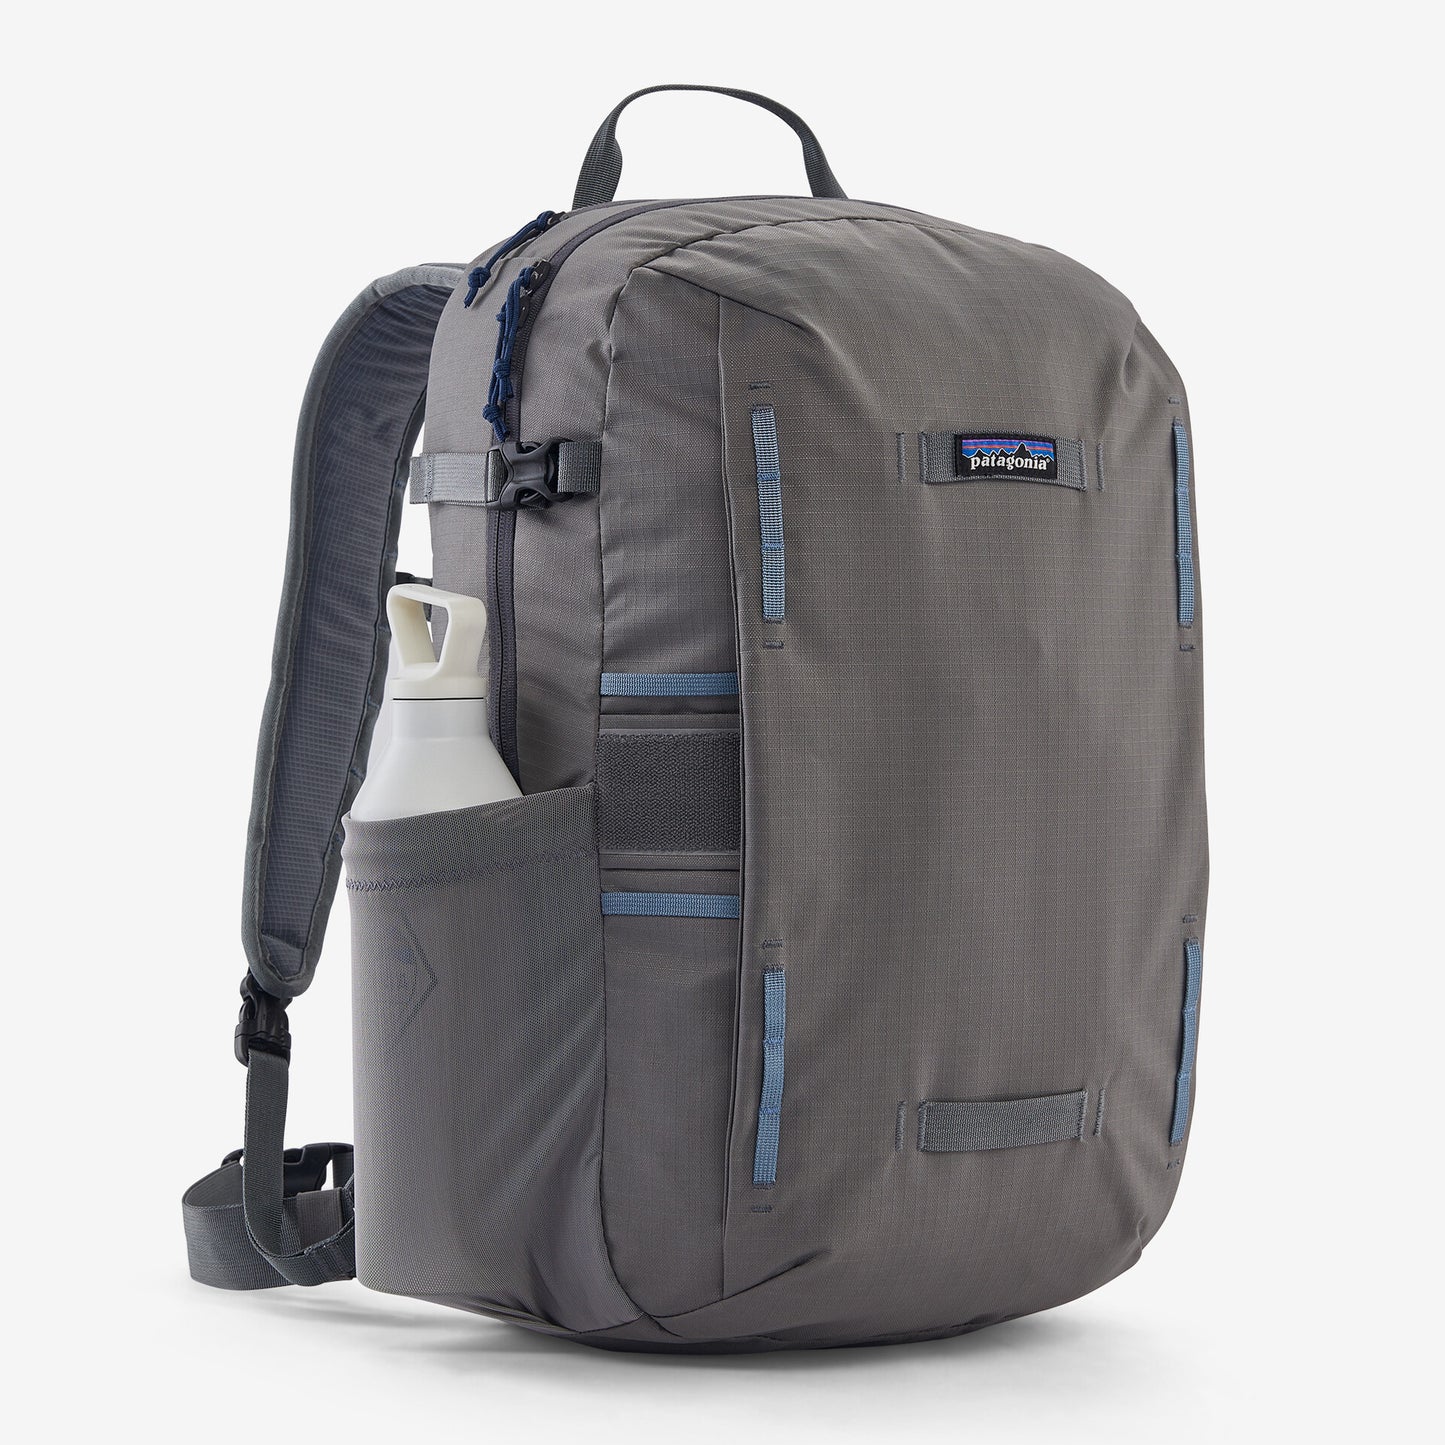 patagonia(パタゴニア) Stealth Pack 89167